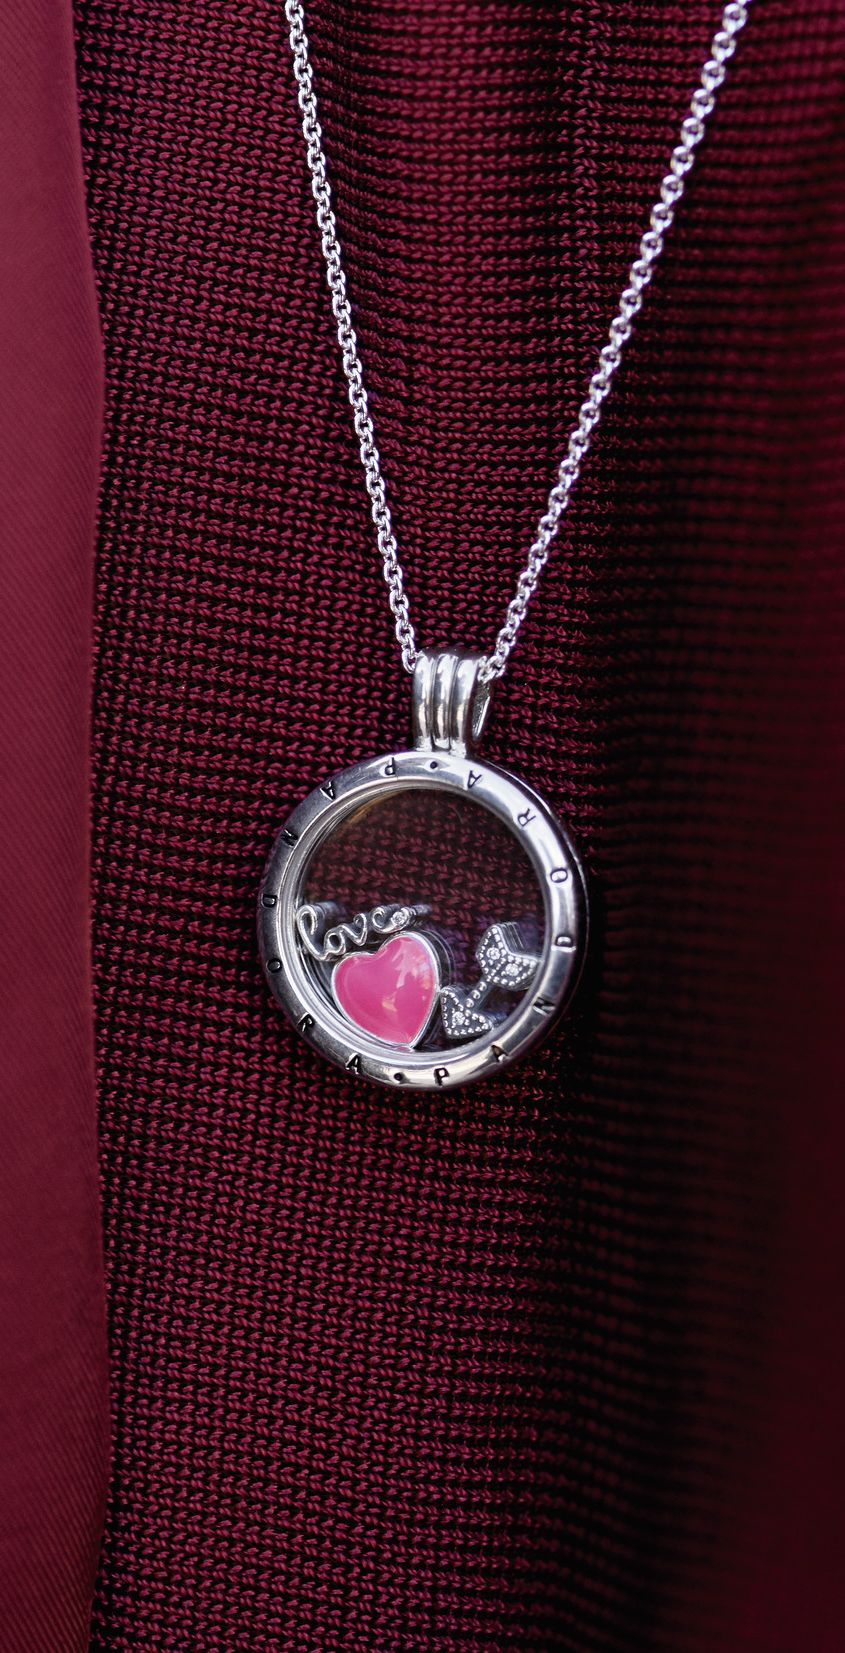 2018 Silver & Gold Jewelry Collection | Pandora Lockets | Jewelry Pertaining To 2019 Pink Cherry Blossom Flower Locket Element Necklaces (View 18 of 25)